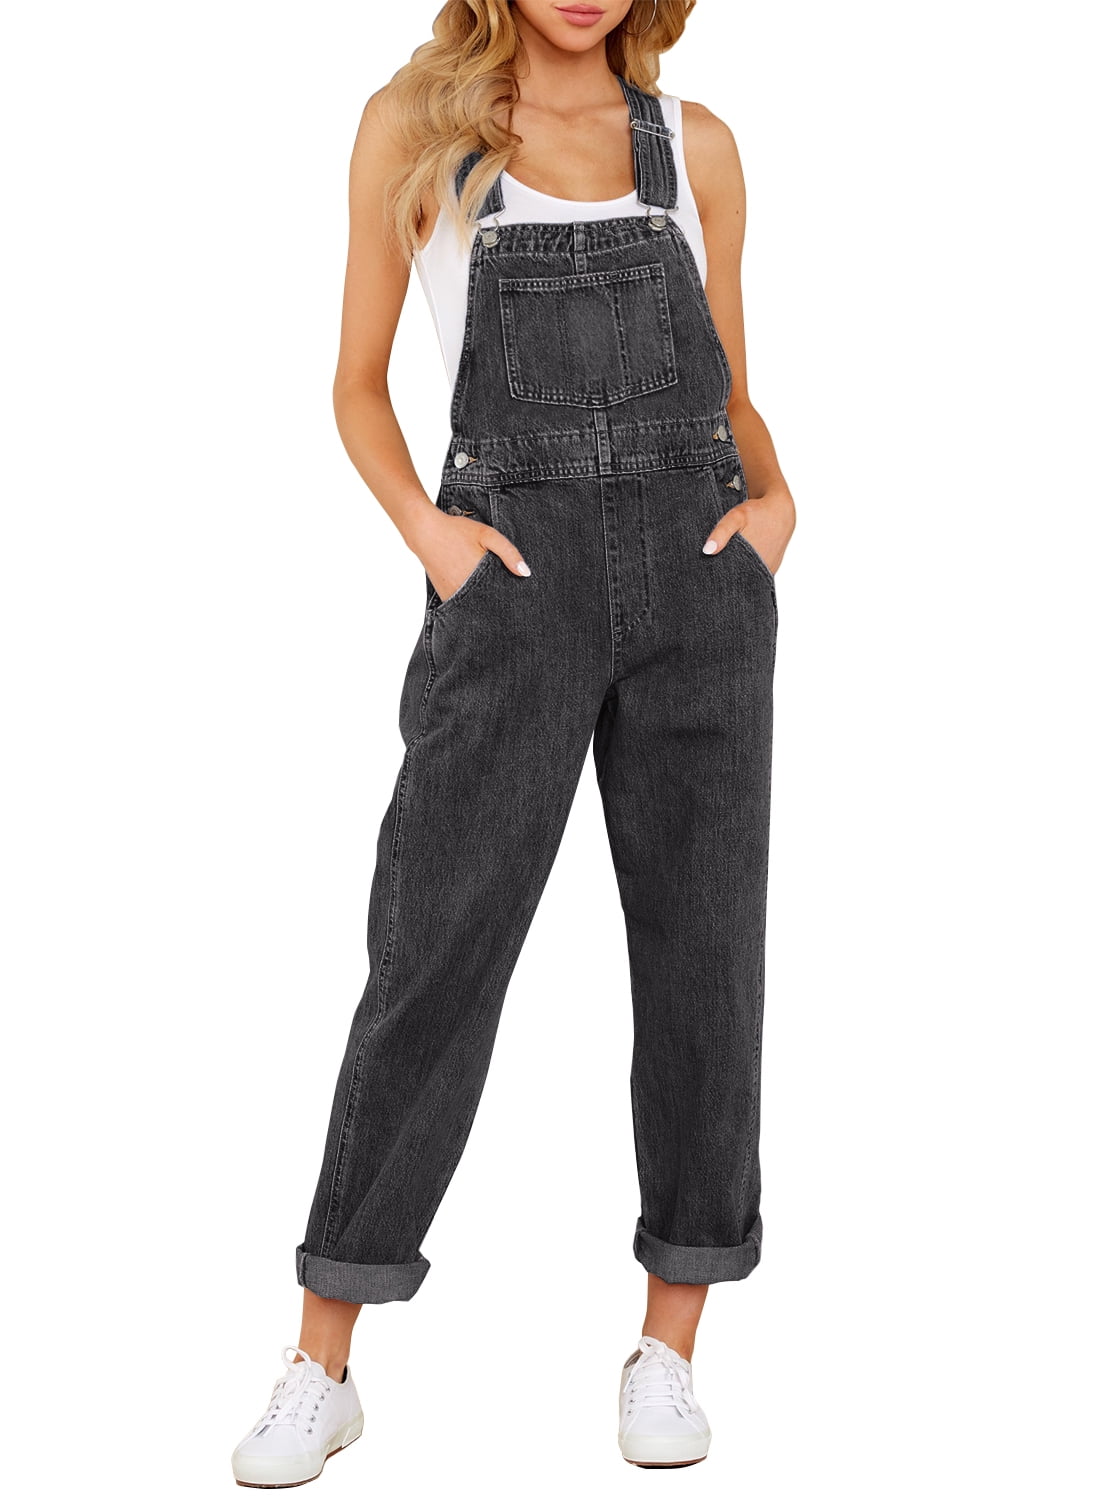 LookbookStore Long Overalls Pants for Women Casual Stretch Denim